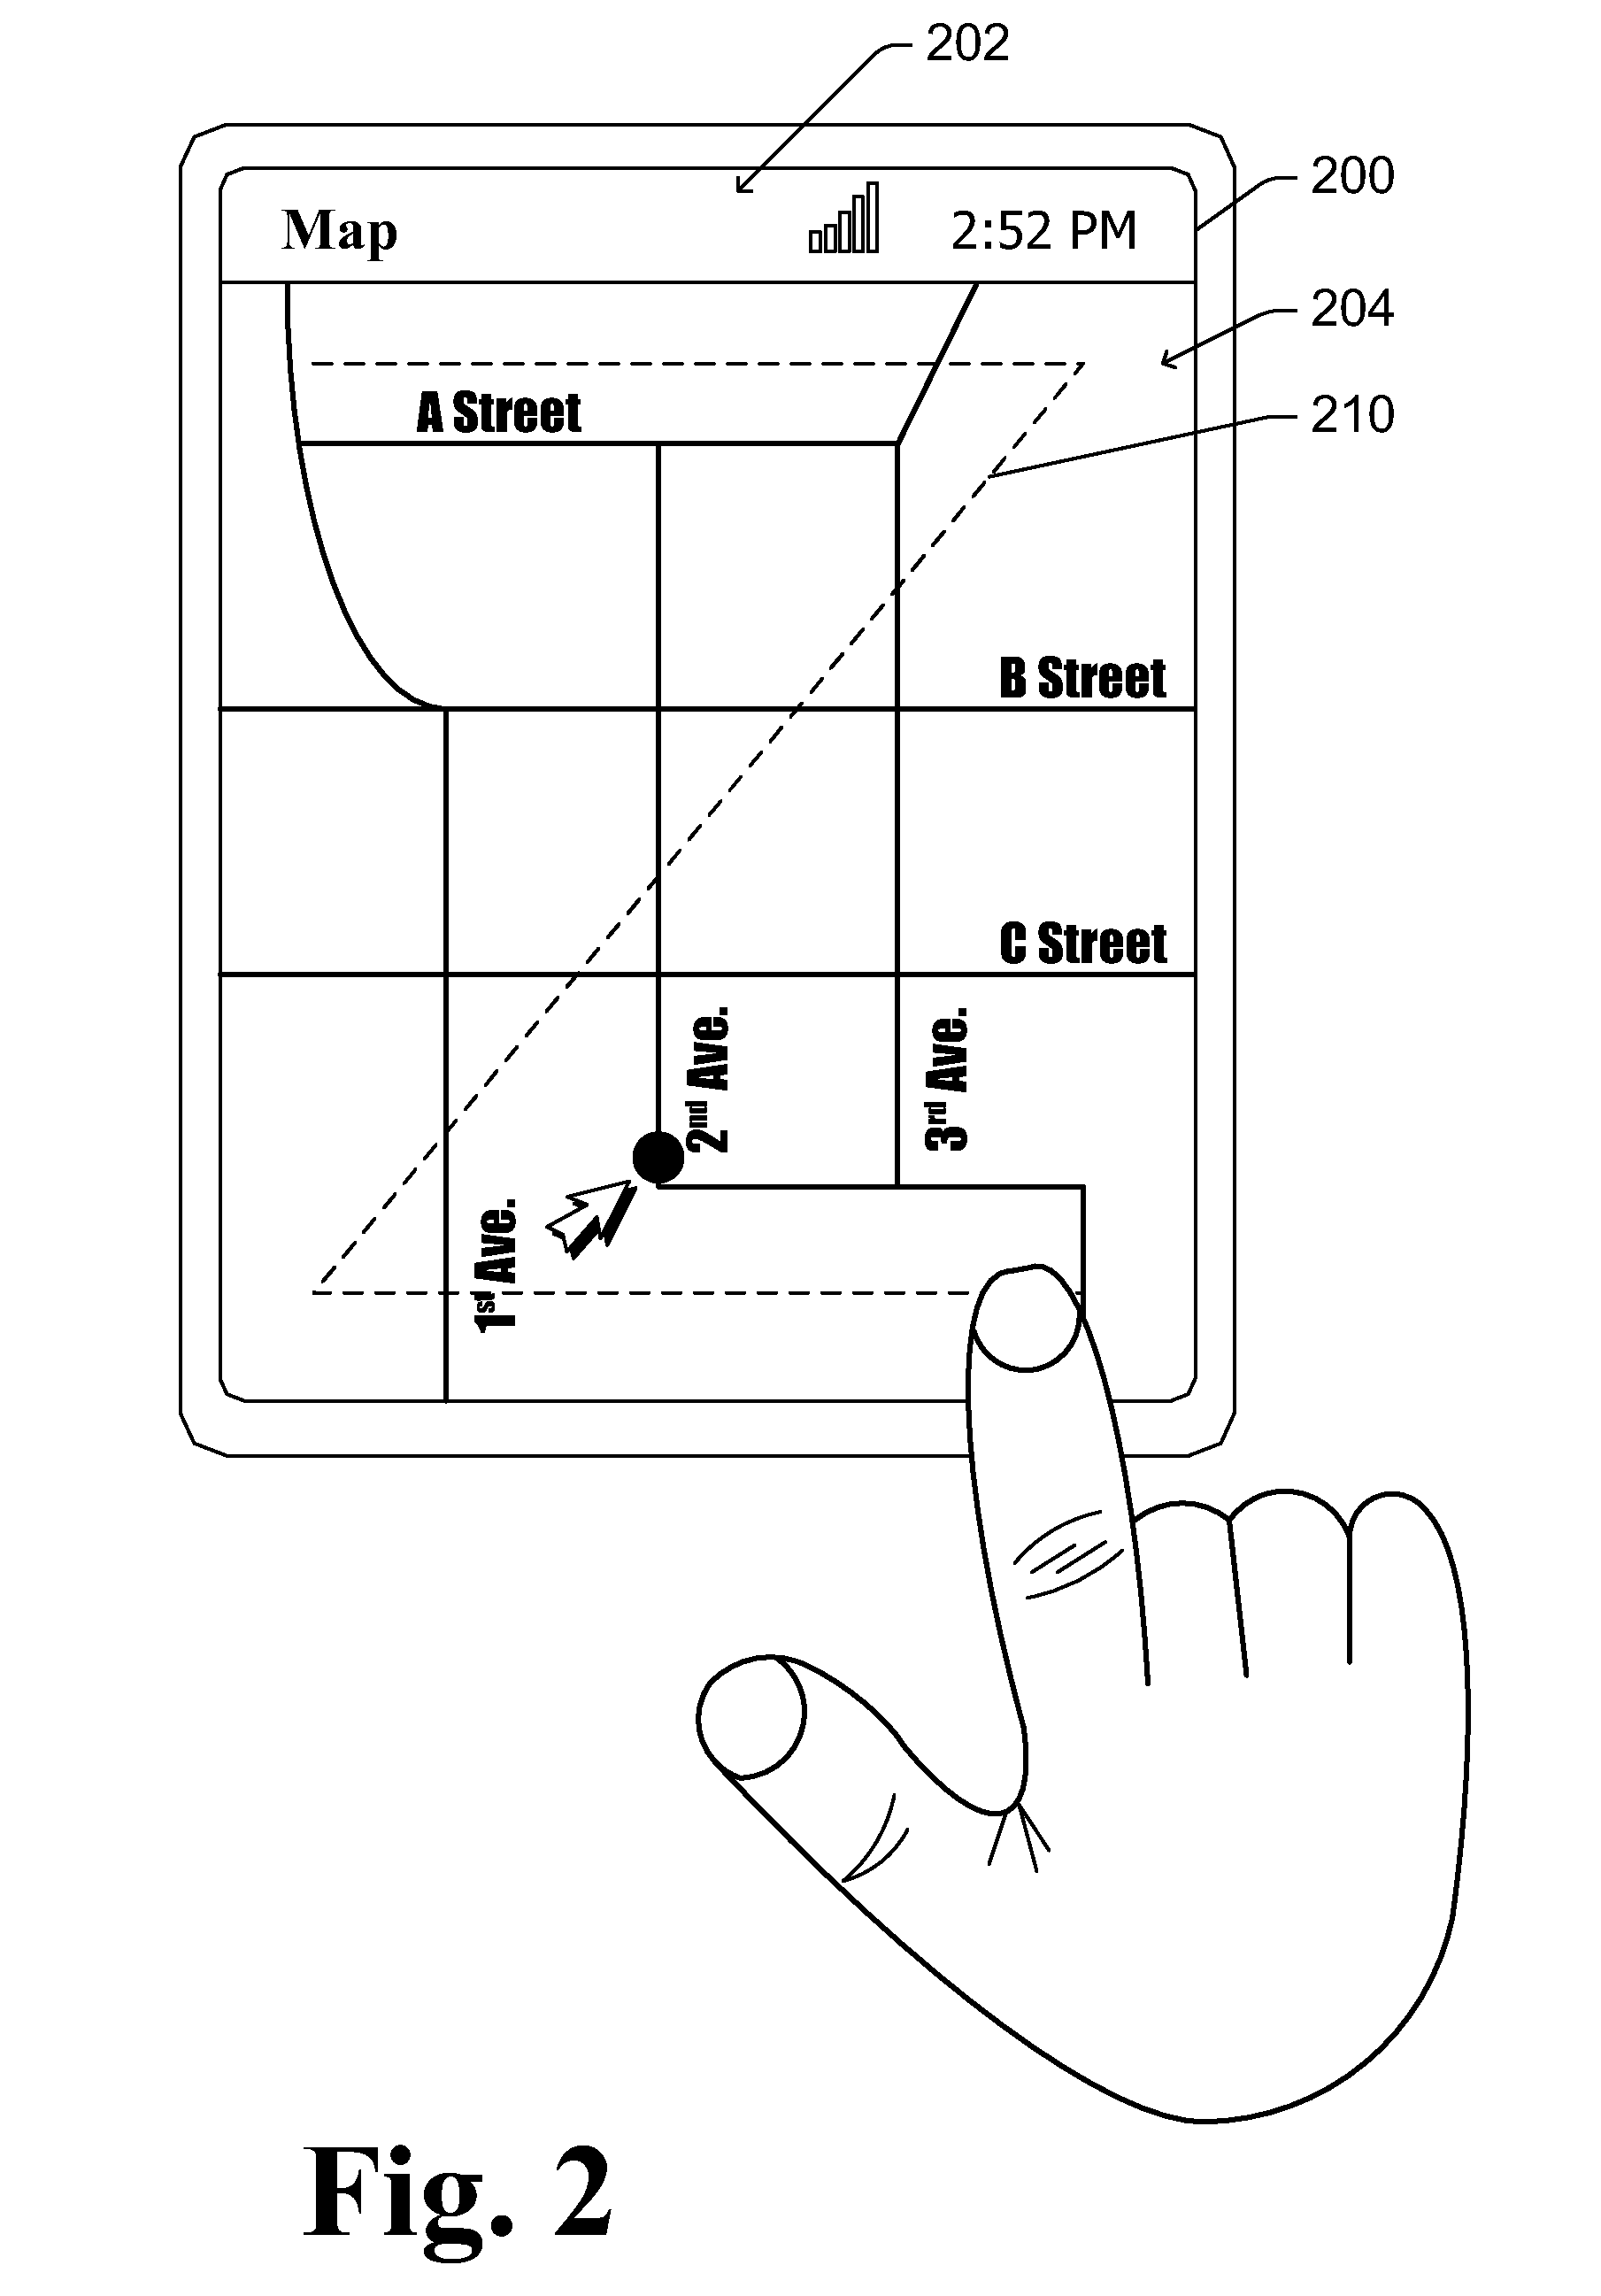 Application Display on a Locked Device